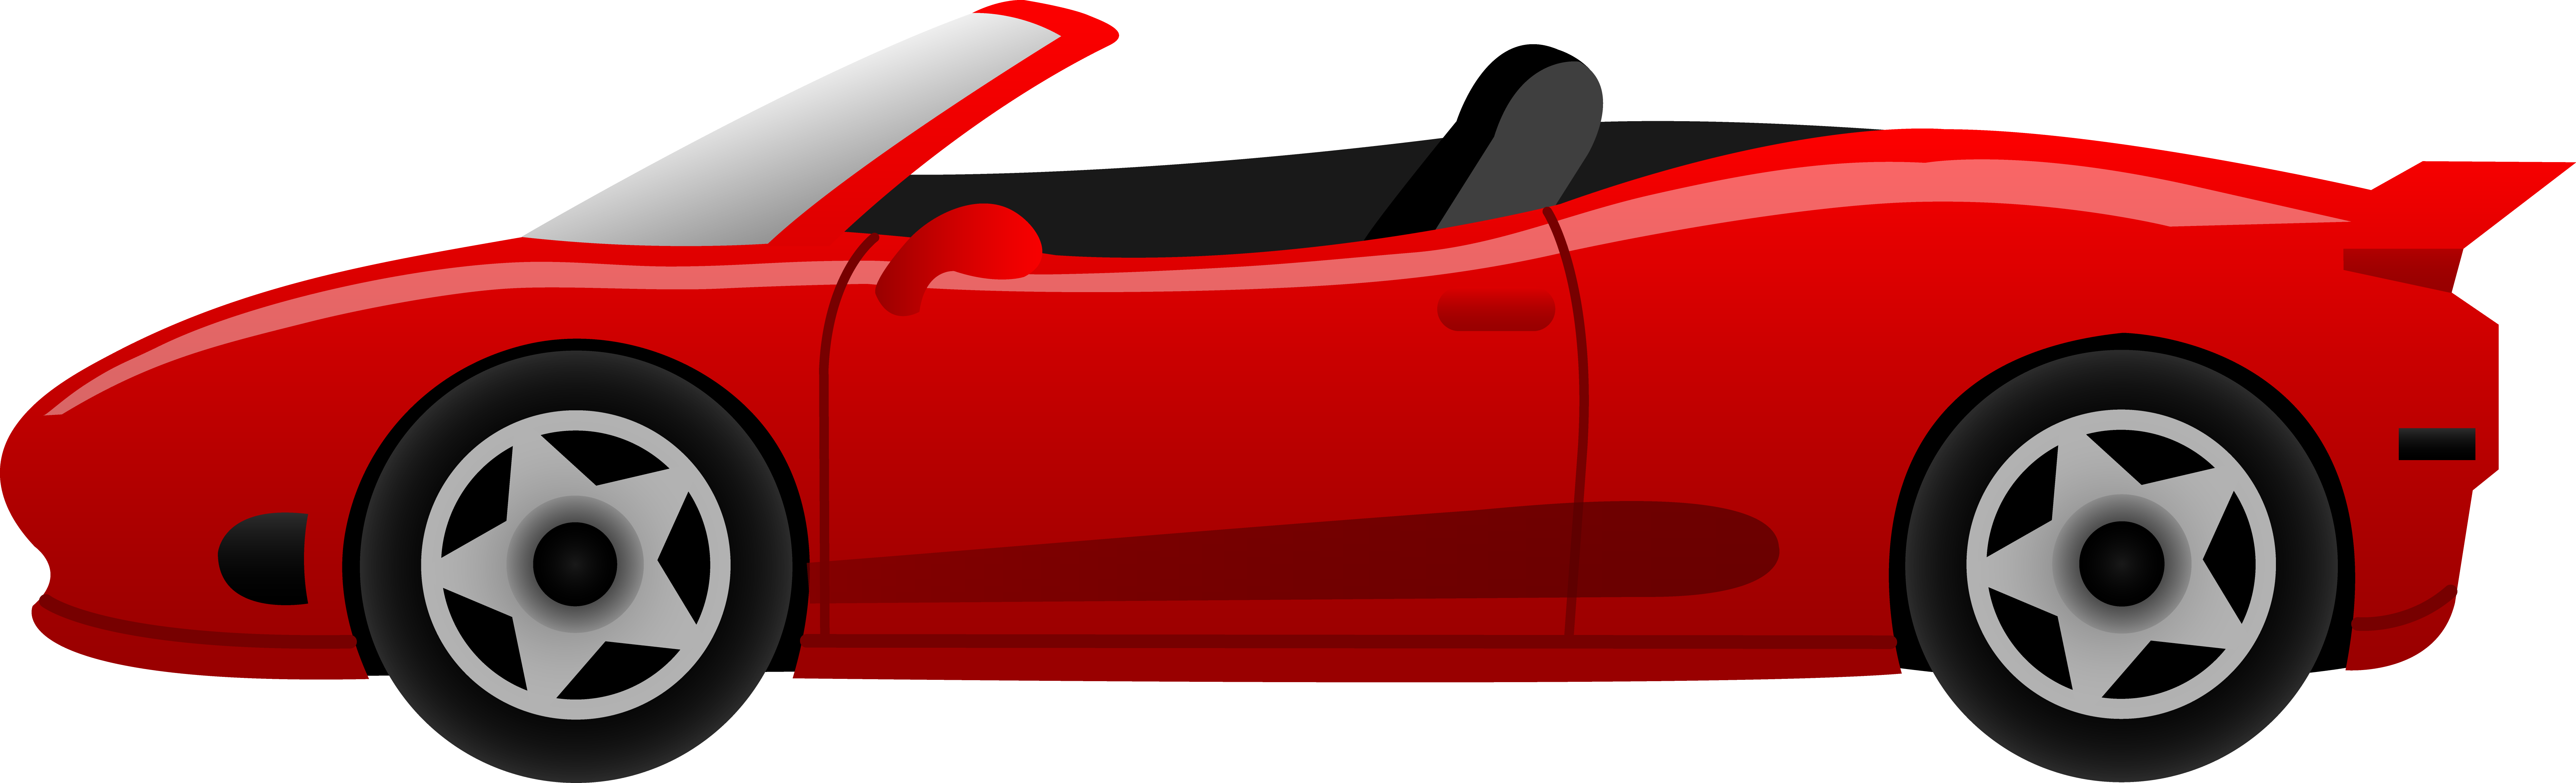 Car side png clipart